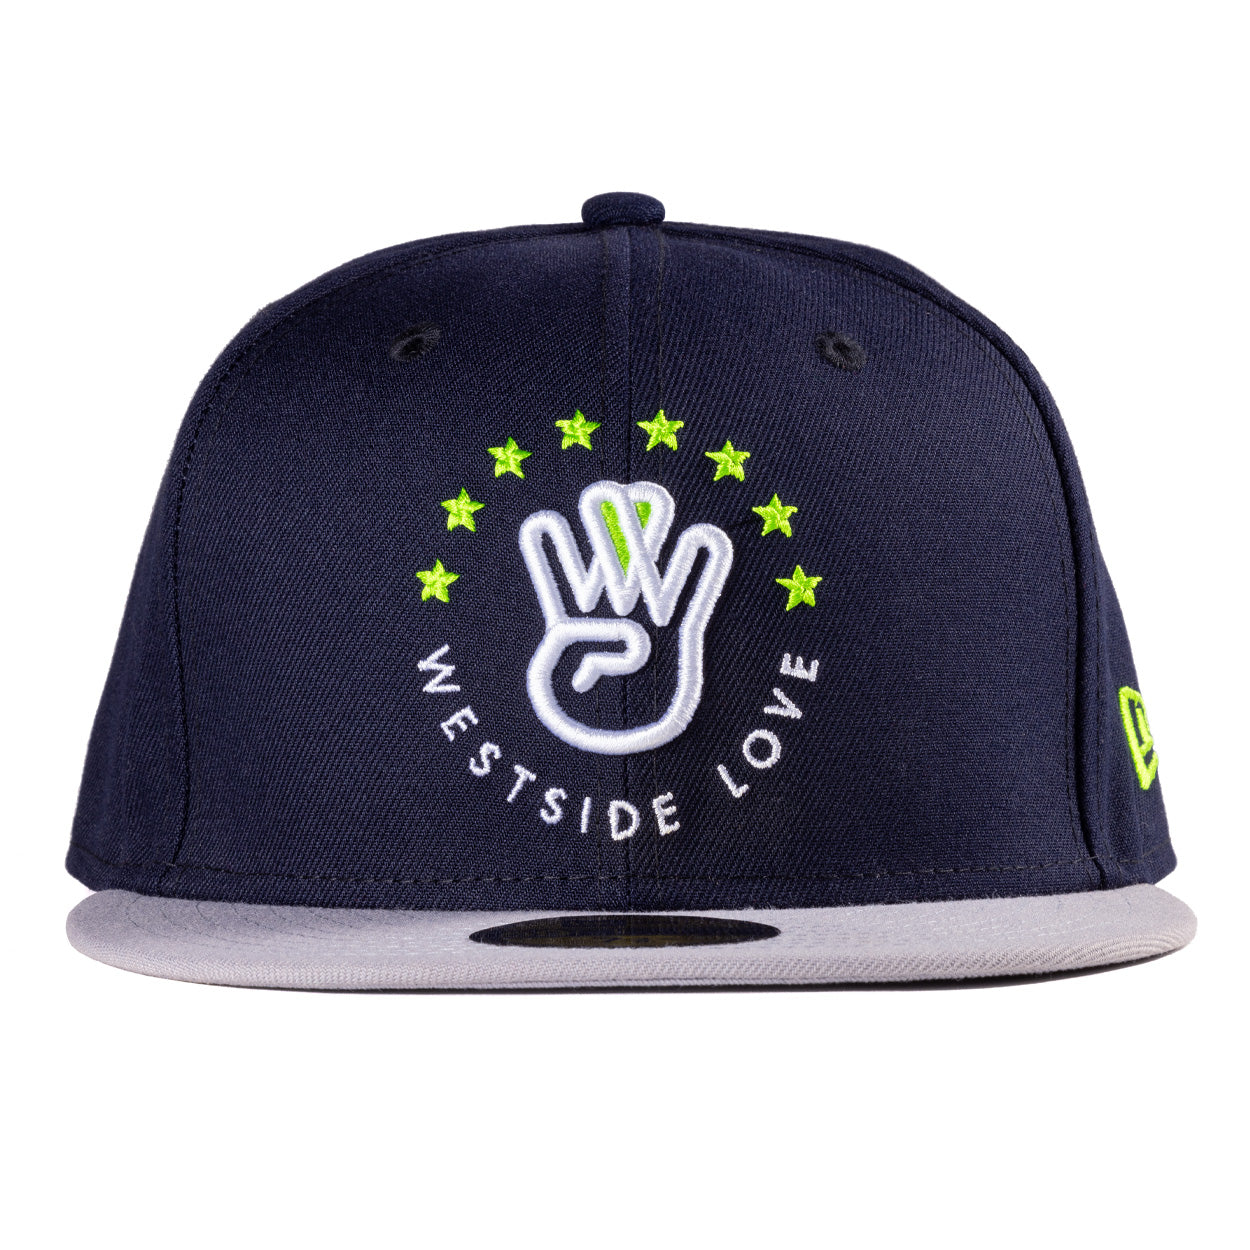 Emerald City New Era Fitted